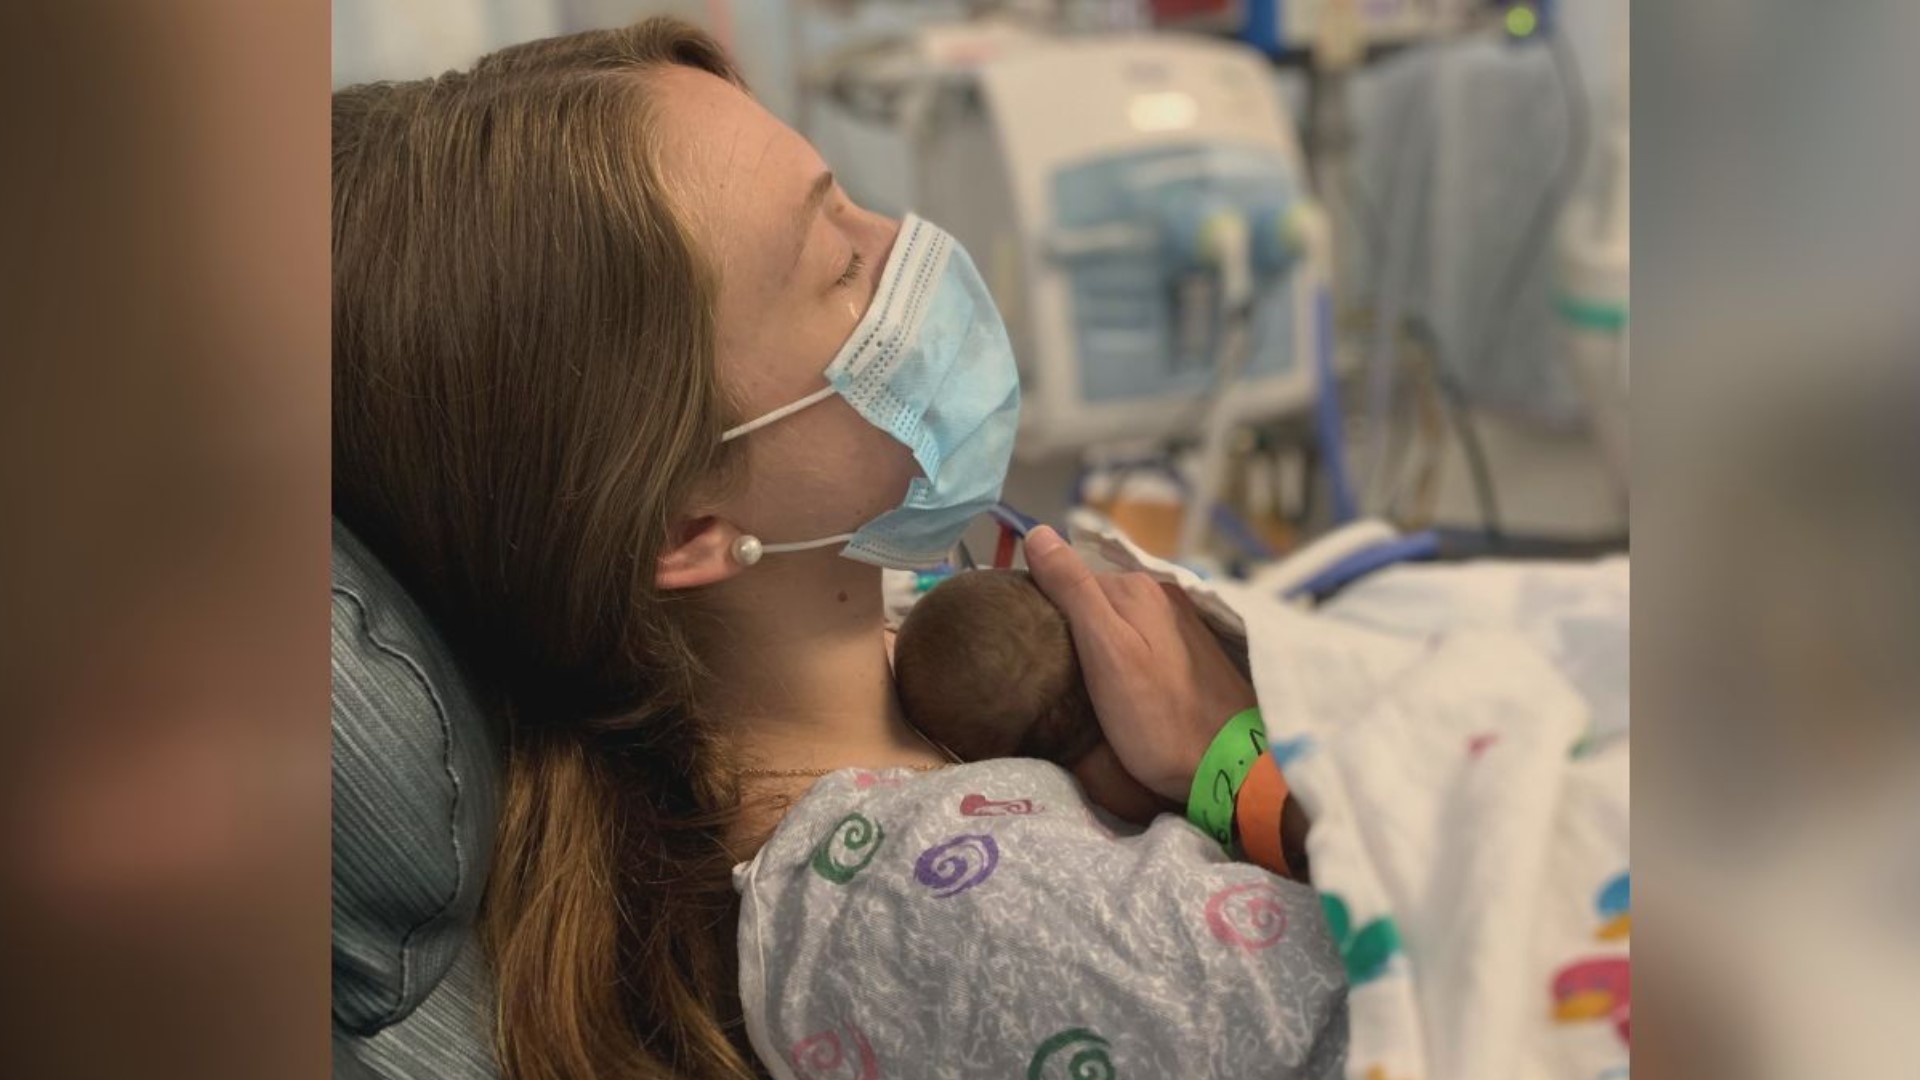 Jenny Gooch was in her second trimester when COVID triggered pre-term labor. She's sharing her story and grief in hopes of saving lives -- in her son's honor.